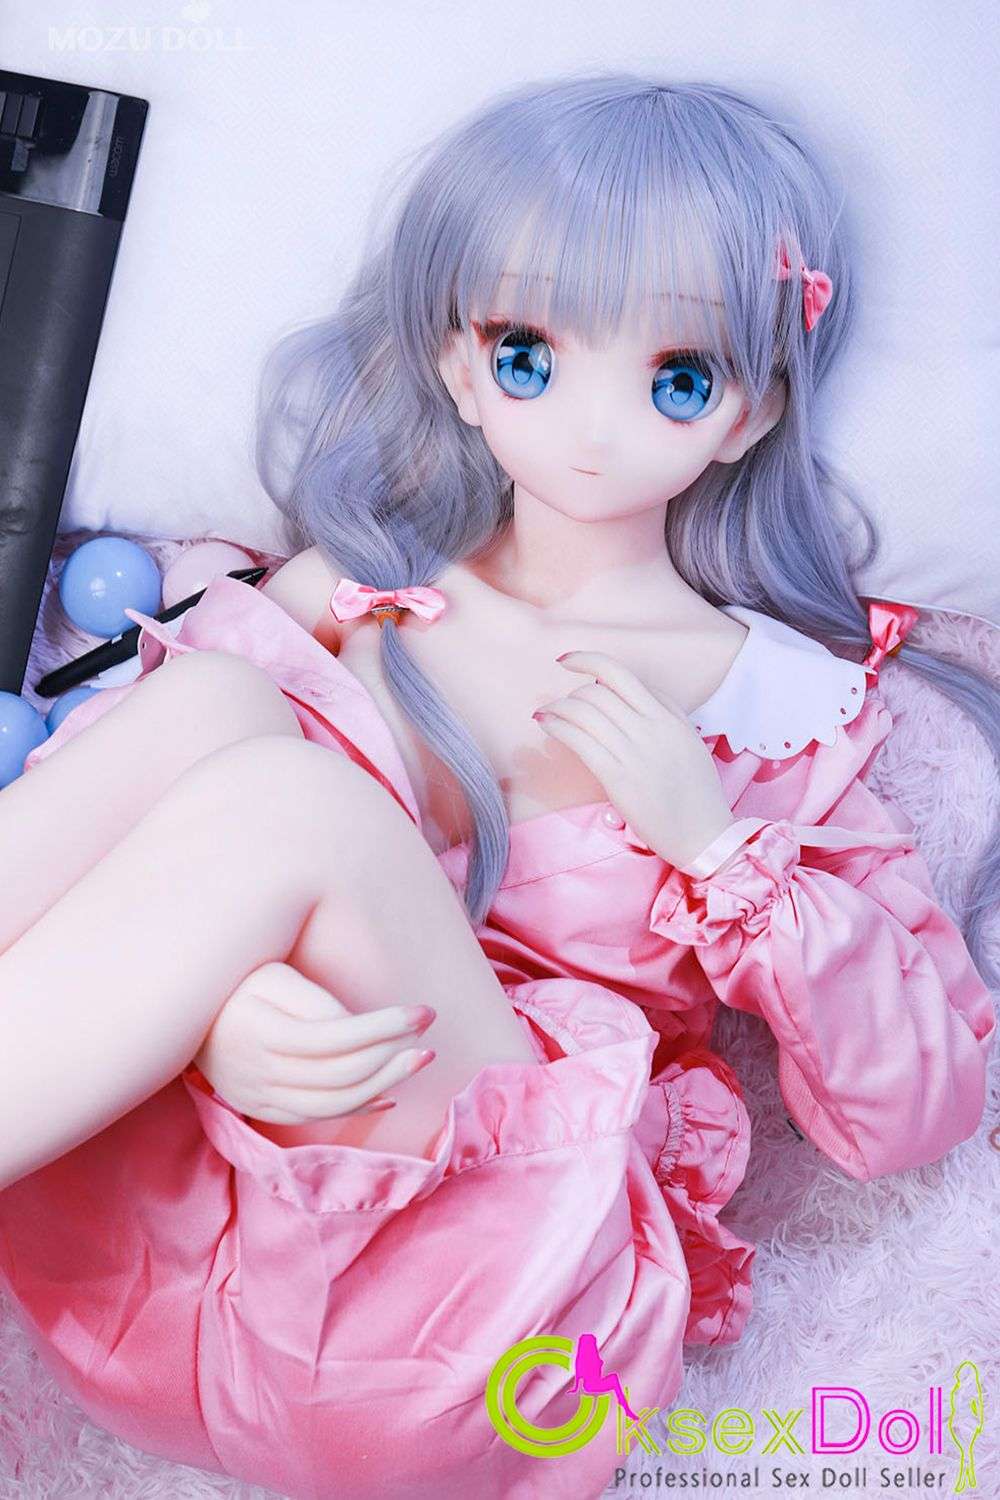 sex doll pics of Pic of 『Namika』